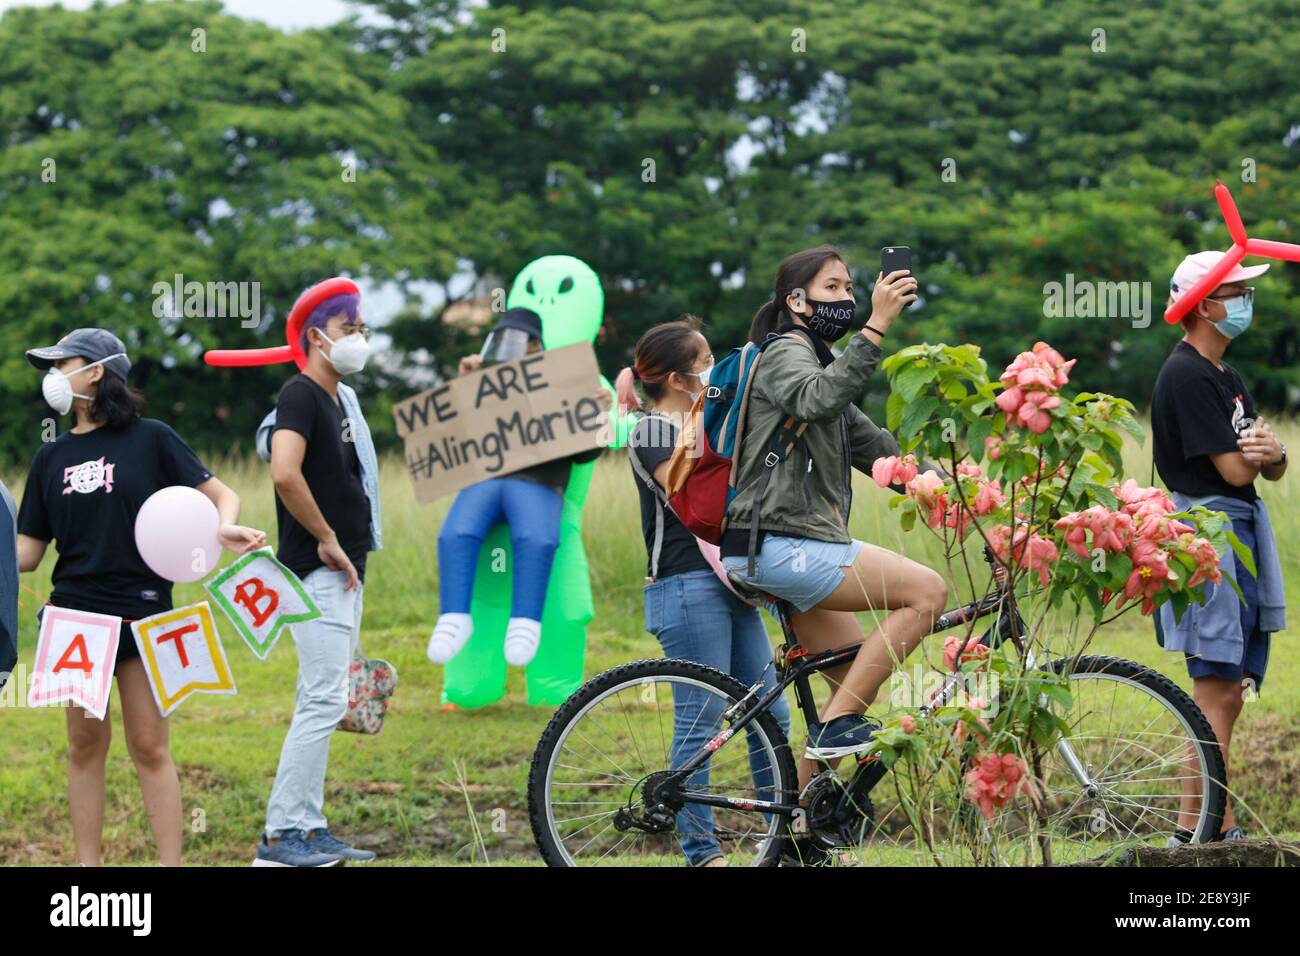 A female photographer on a bike trying to take photos of the ongoing protest against the passing of Anti Terrorism Law. June 12, 2020, Quezon City Philippines. Stock Photo